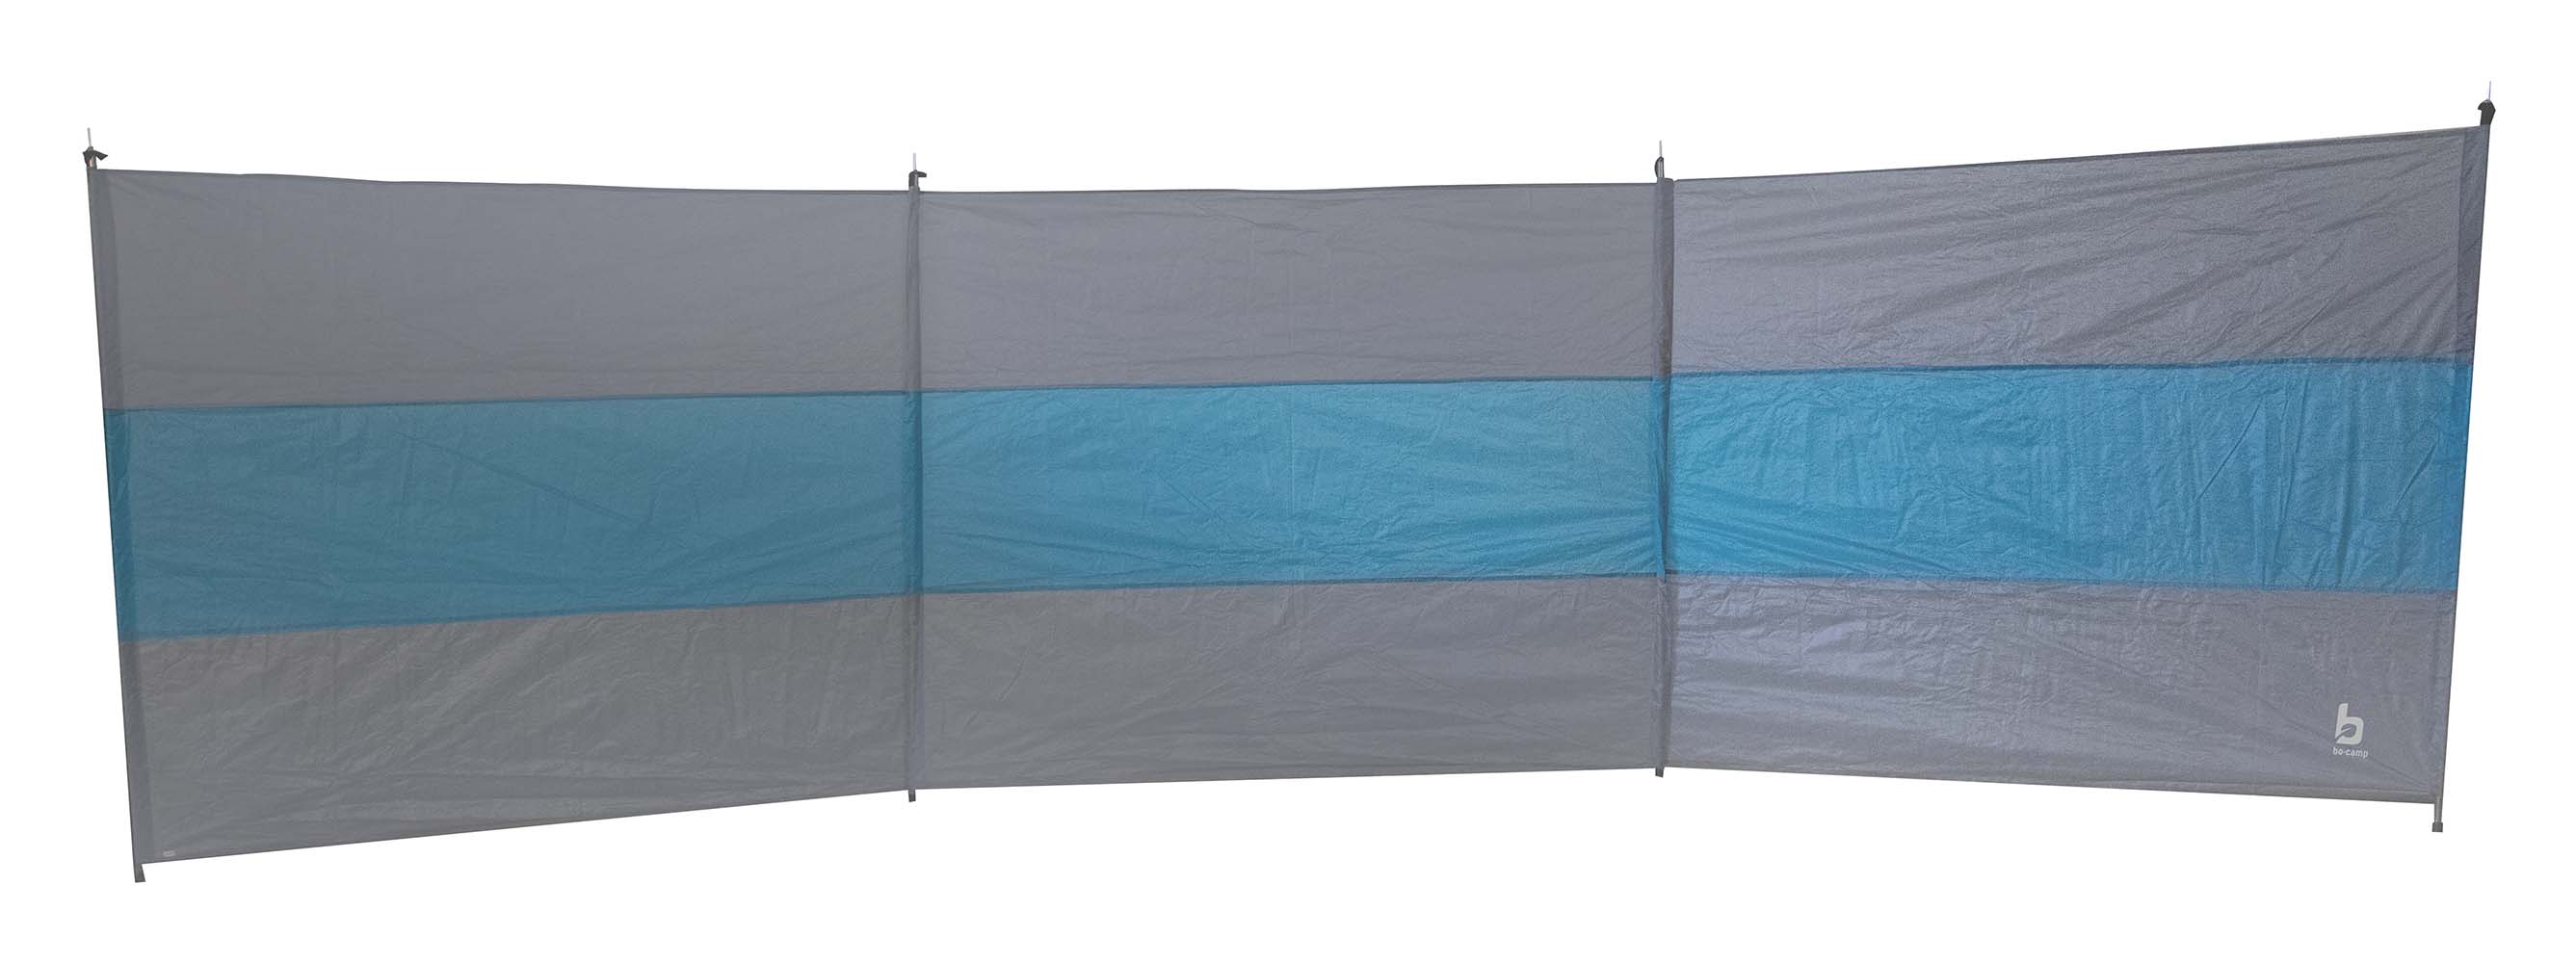 4367620 A stylish 3 part wind screen. Ideal against the wind, the sun or to keep things out of sight. Because the wind screen consists of 3 parts, the angle can be adjusted to any situation. The screen has a modern look. Supplied with a carry bag, guy ropes and pegs.